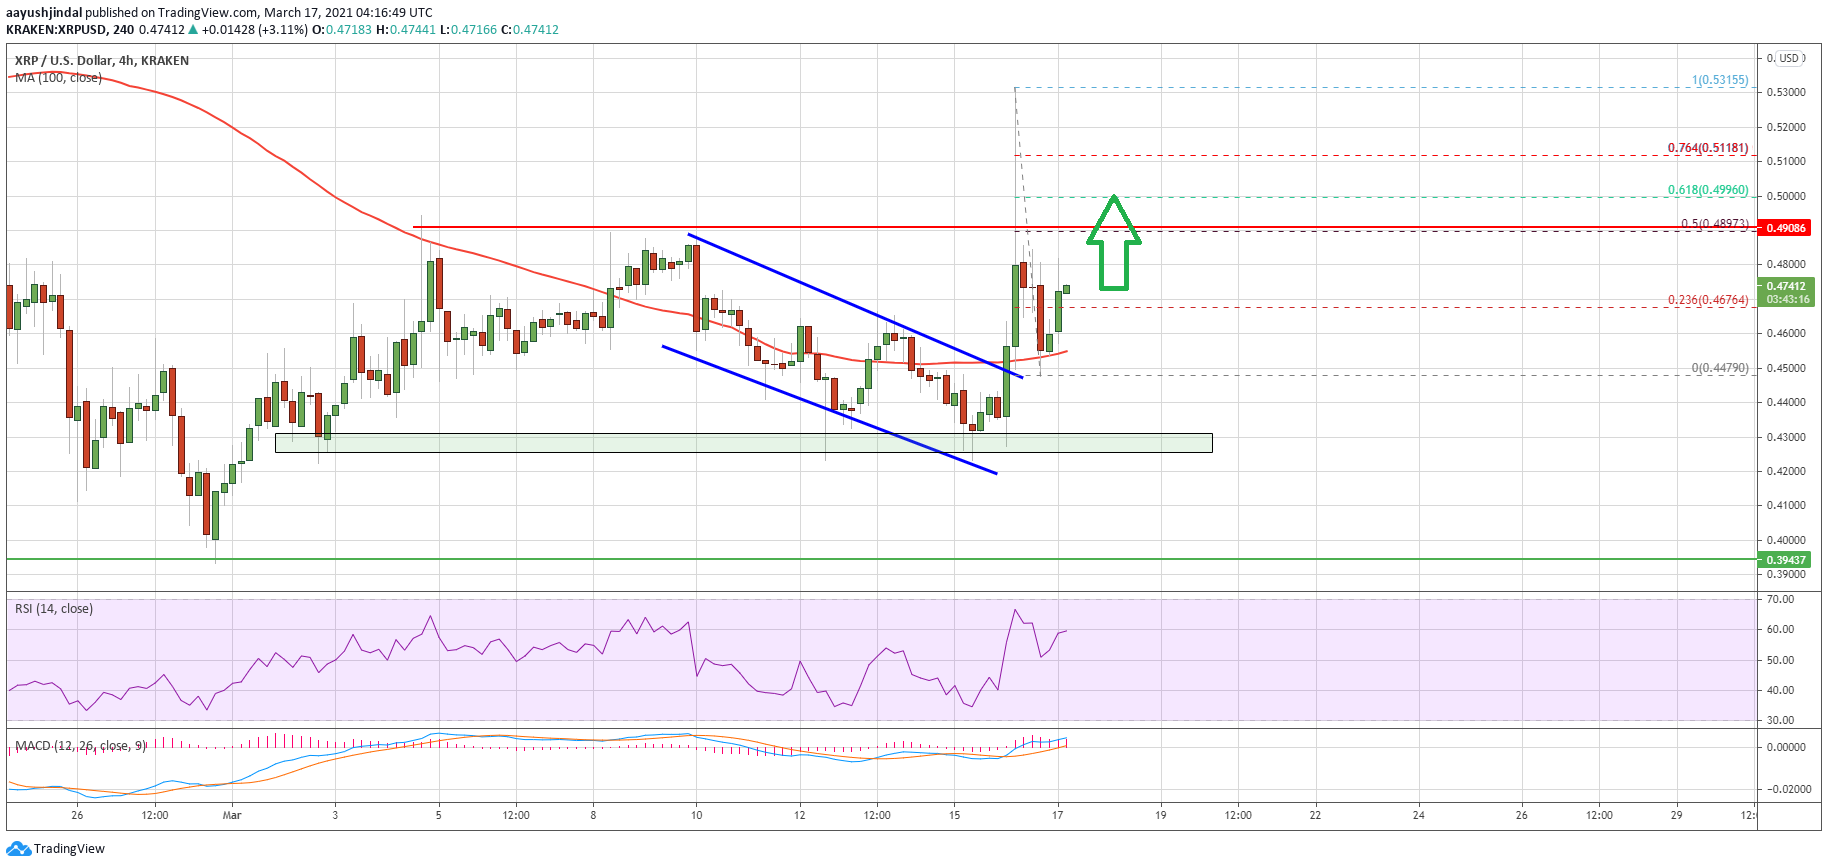 Charted: Ripple (XRP) Signaling Bullish Breakout, Why It Could Surge To $0.55